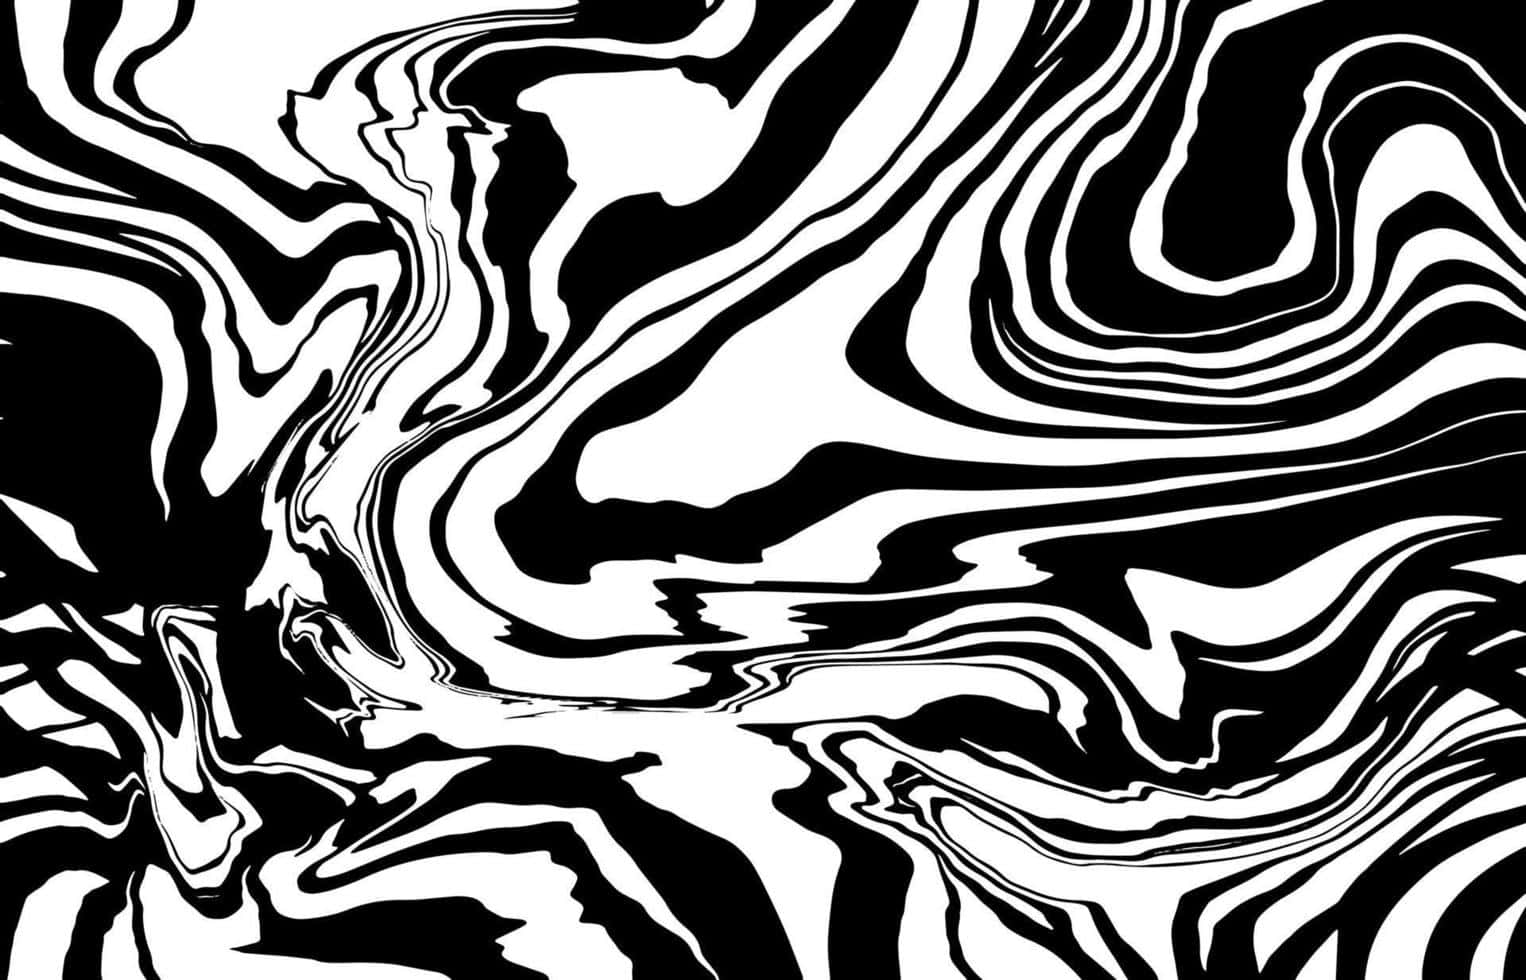 Download A Black And White Abstract Painting With Swirls | Wallpapers.com